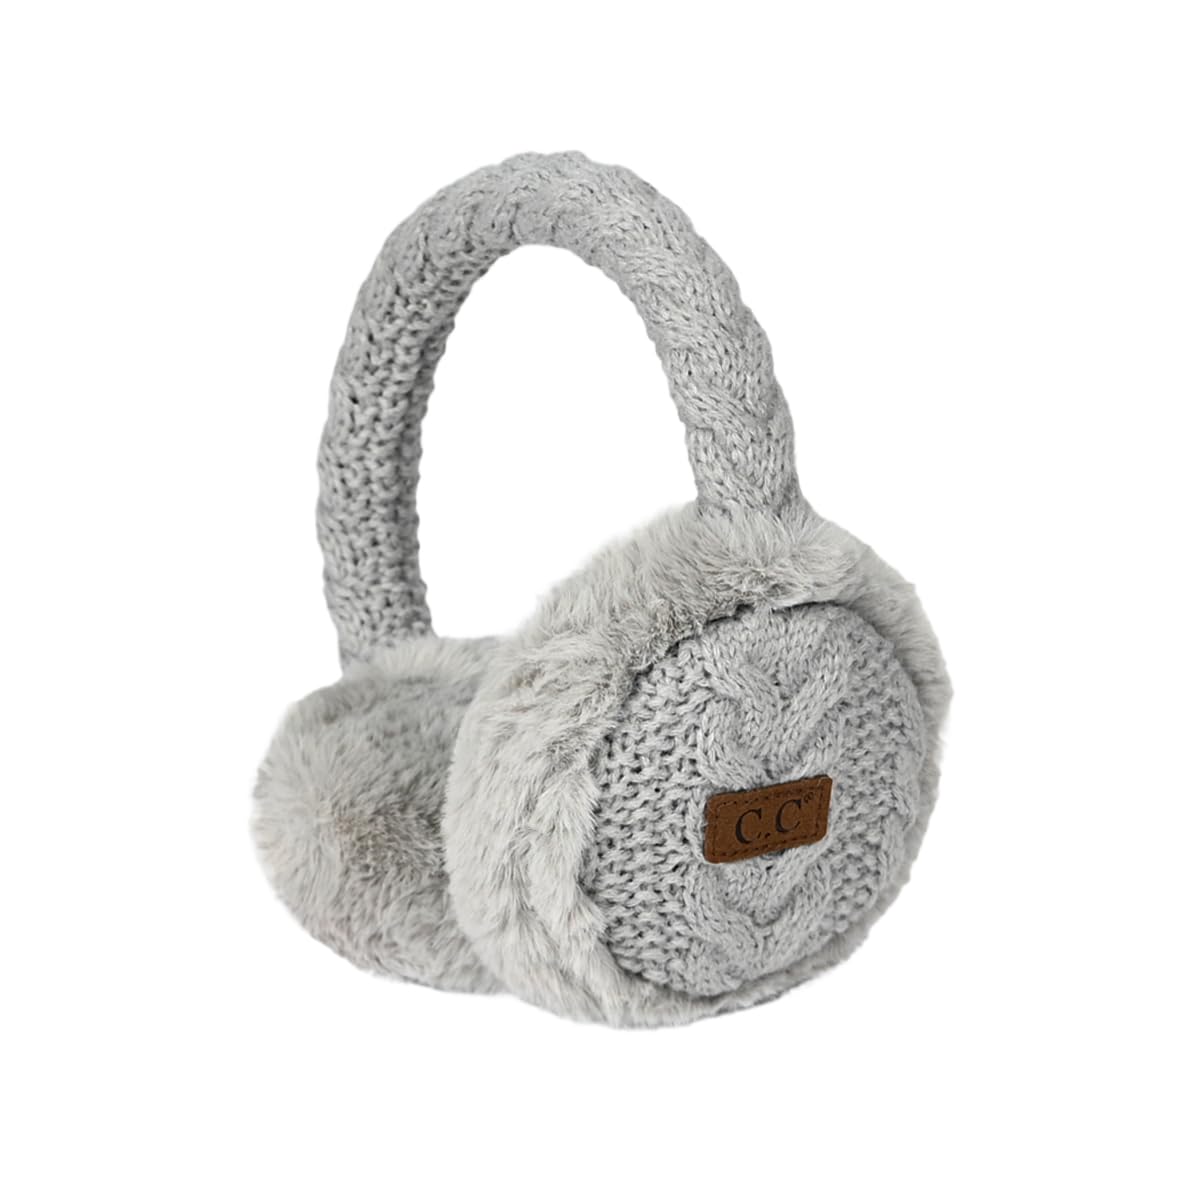 Cable Knit Adjustable Fuzzy Ear Muffs by Funky Junque